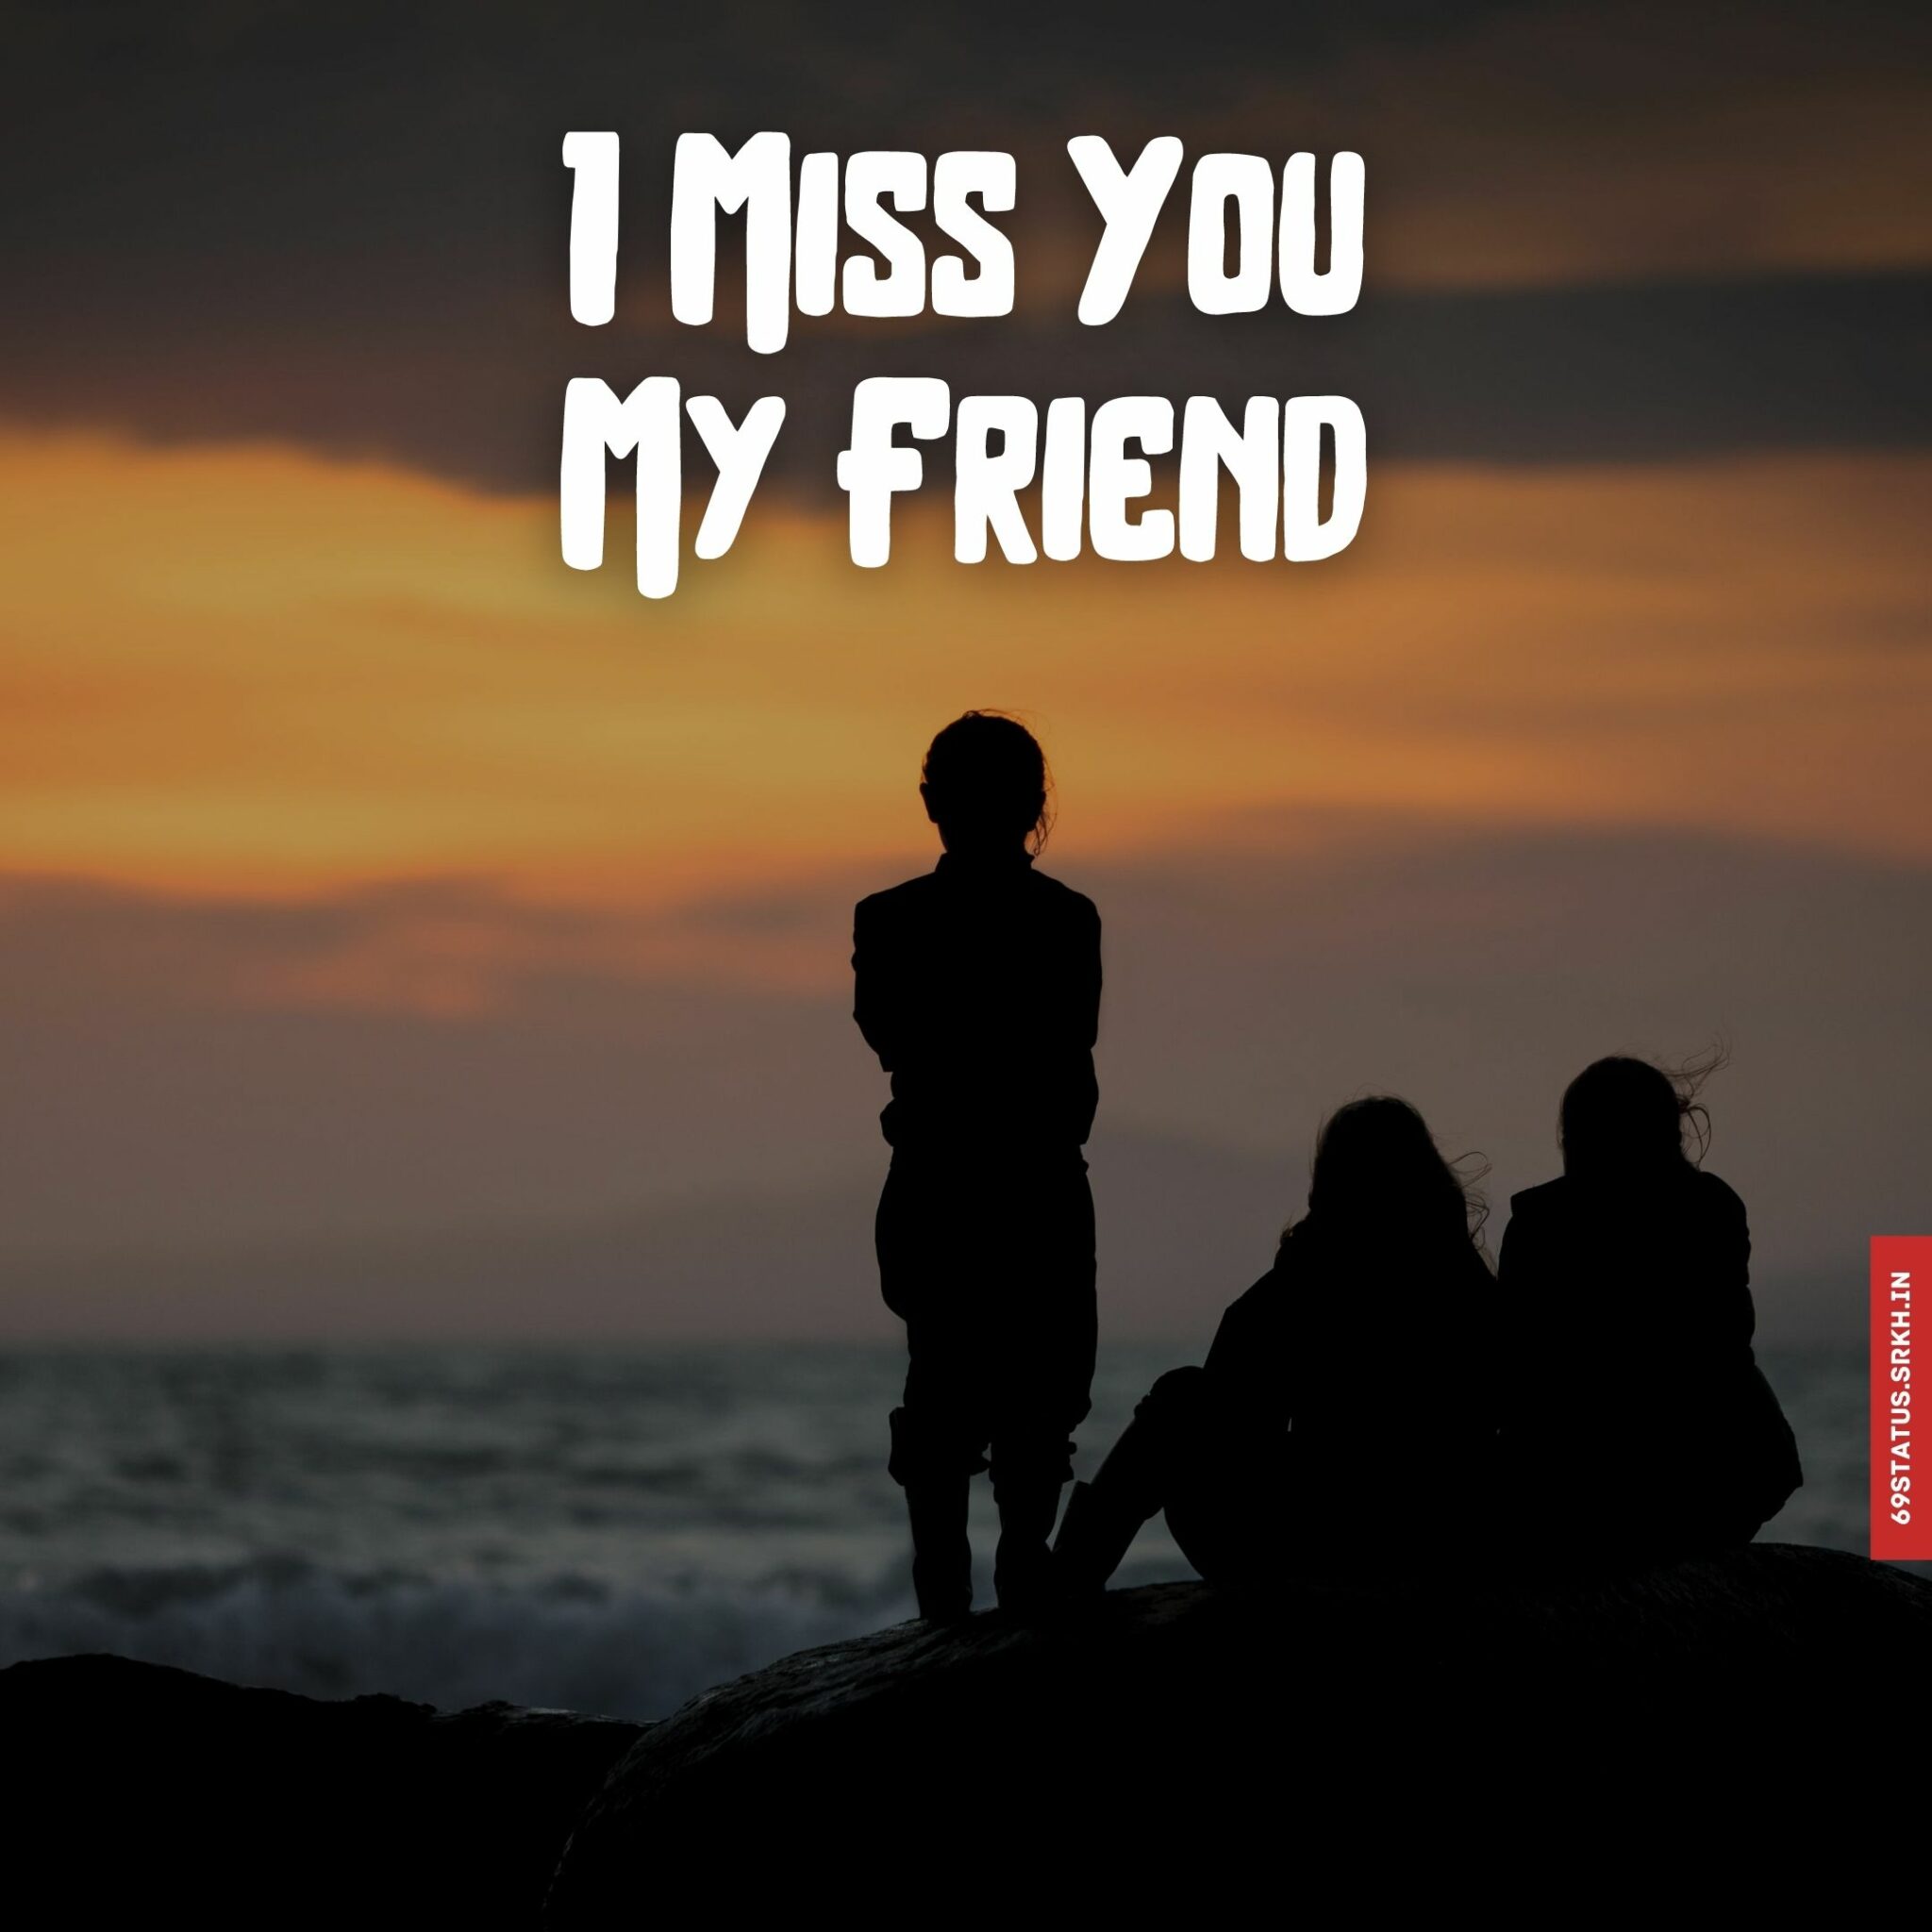 I miss you friend images in full hd